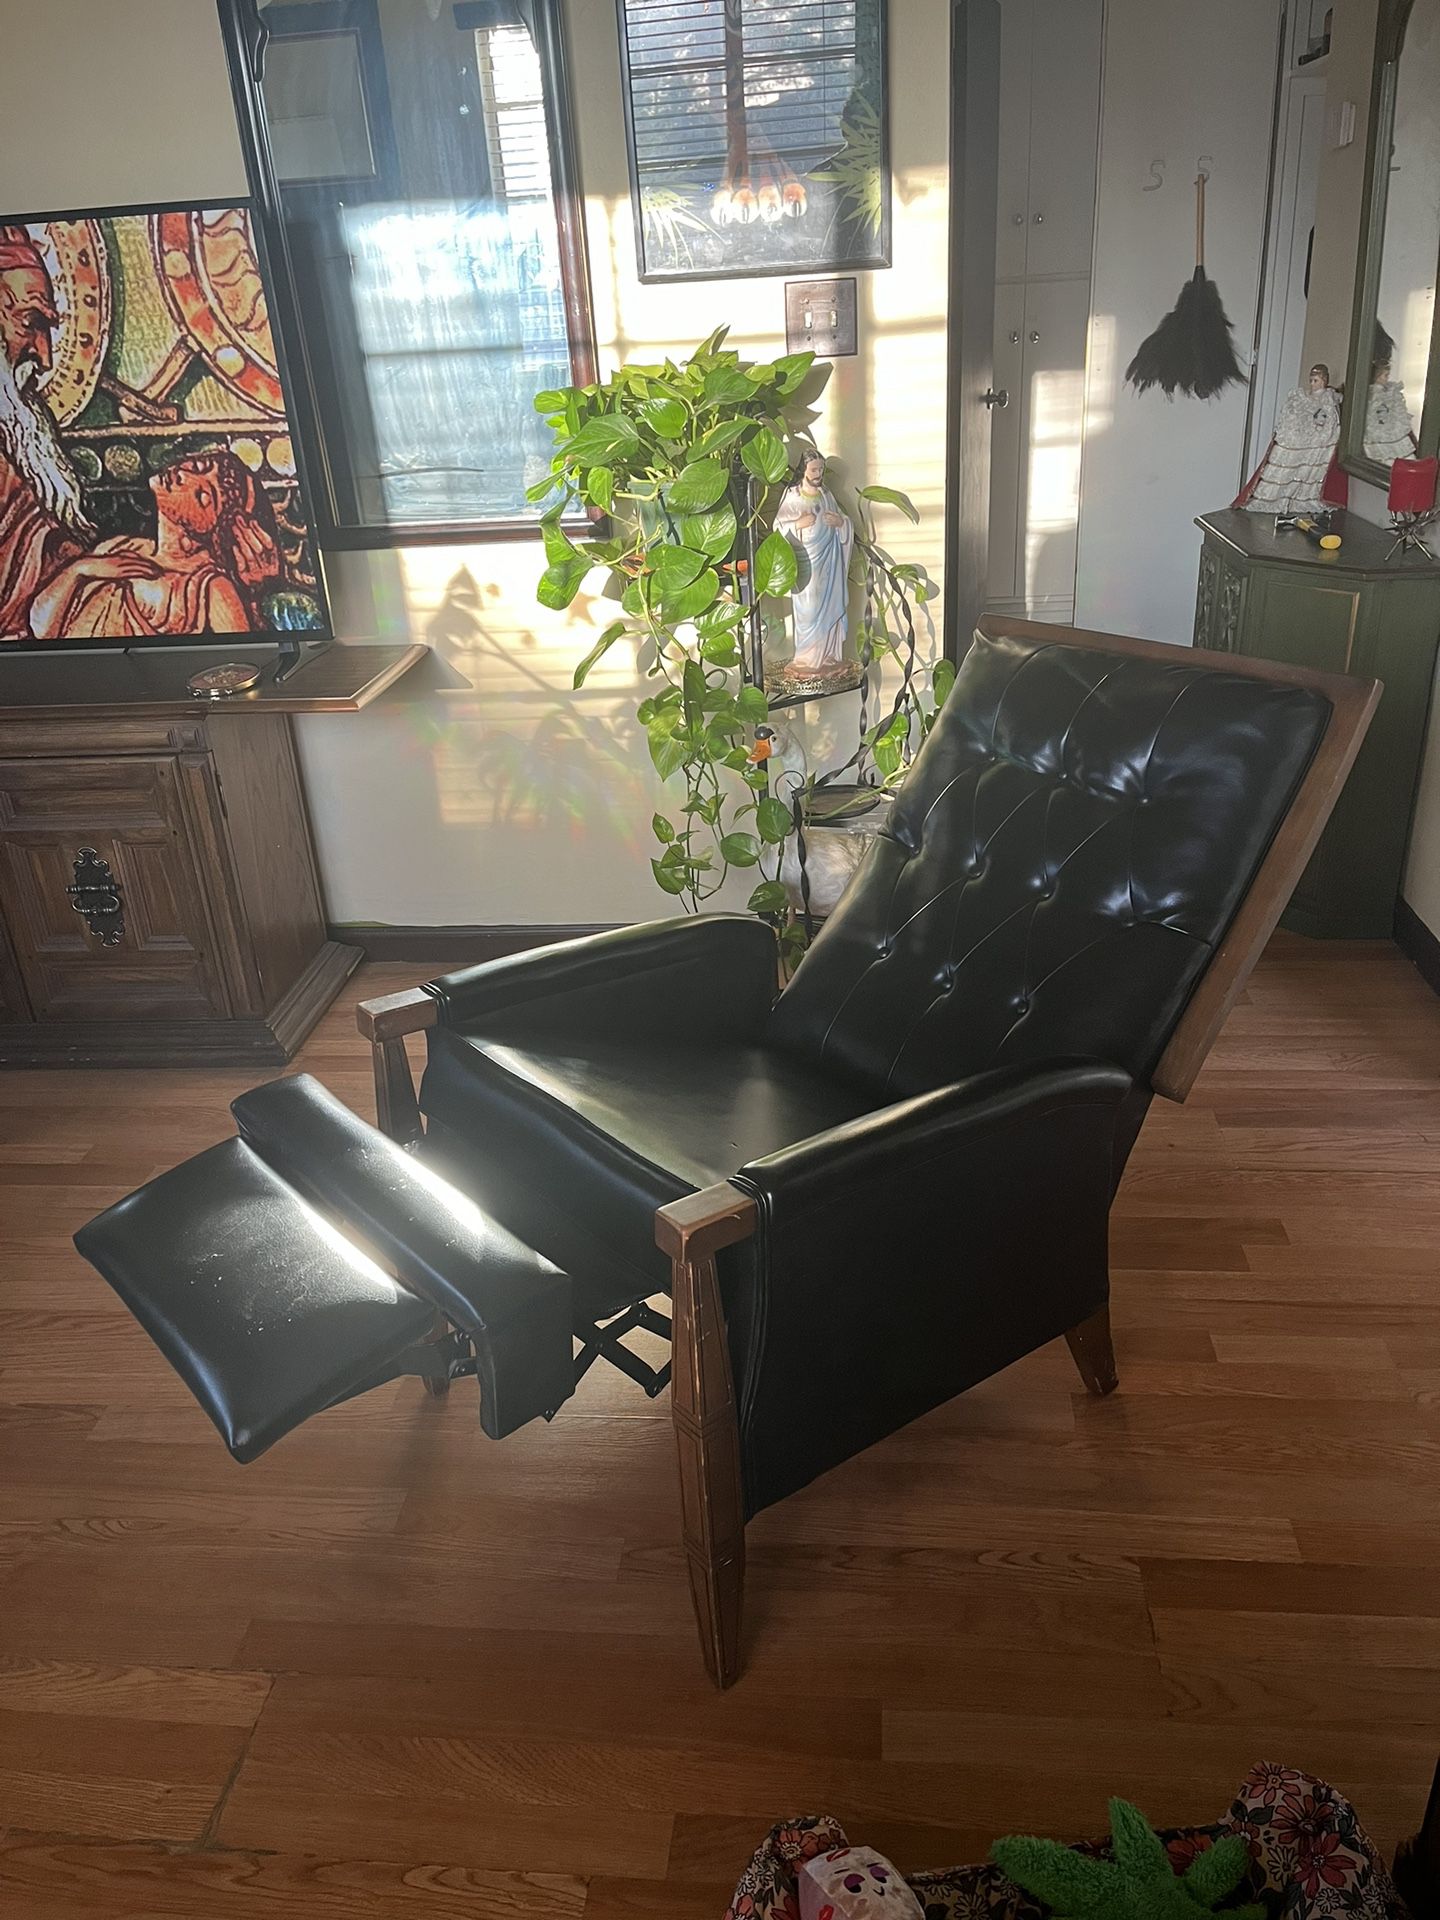 MCM Leather Recliner 